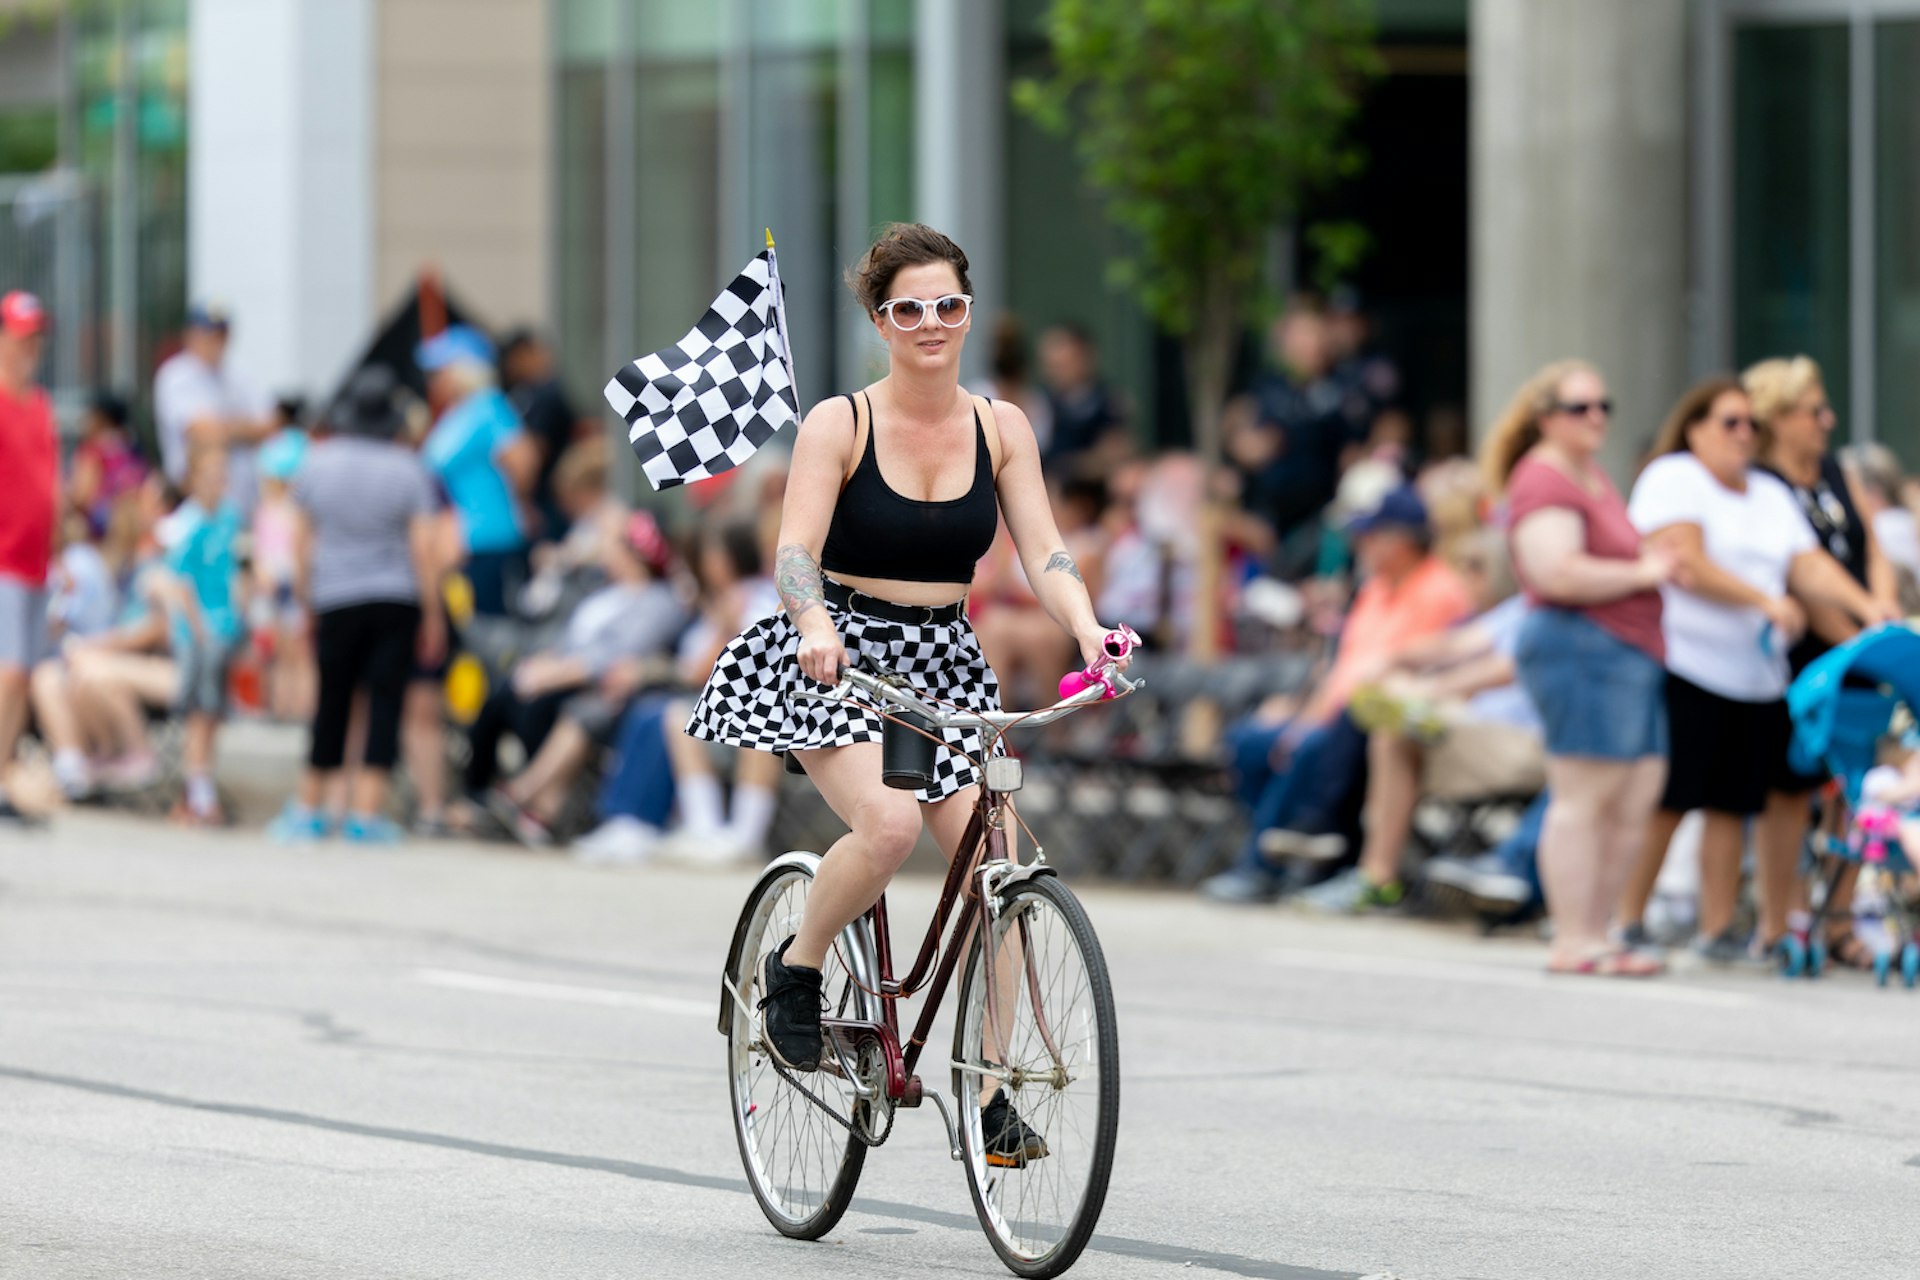 A woman rides a bike down Pennsylvania Street prior to the Indy 500 Parade, Indianapolis, Indiana, Midwest, USA